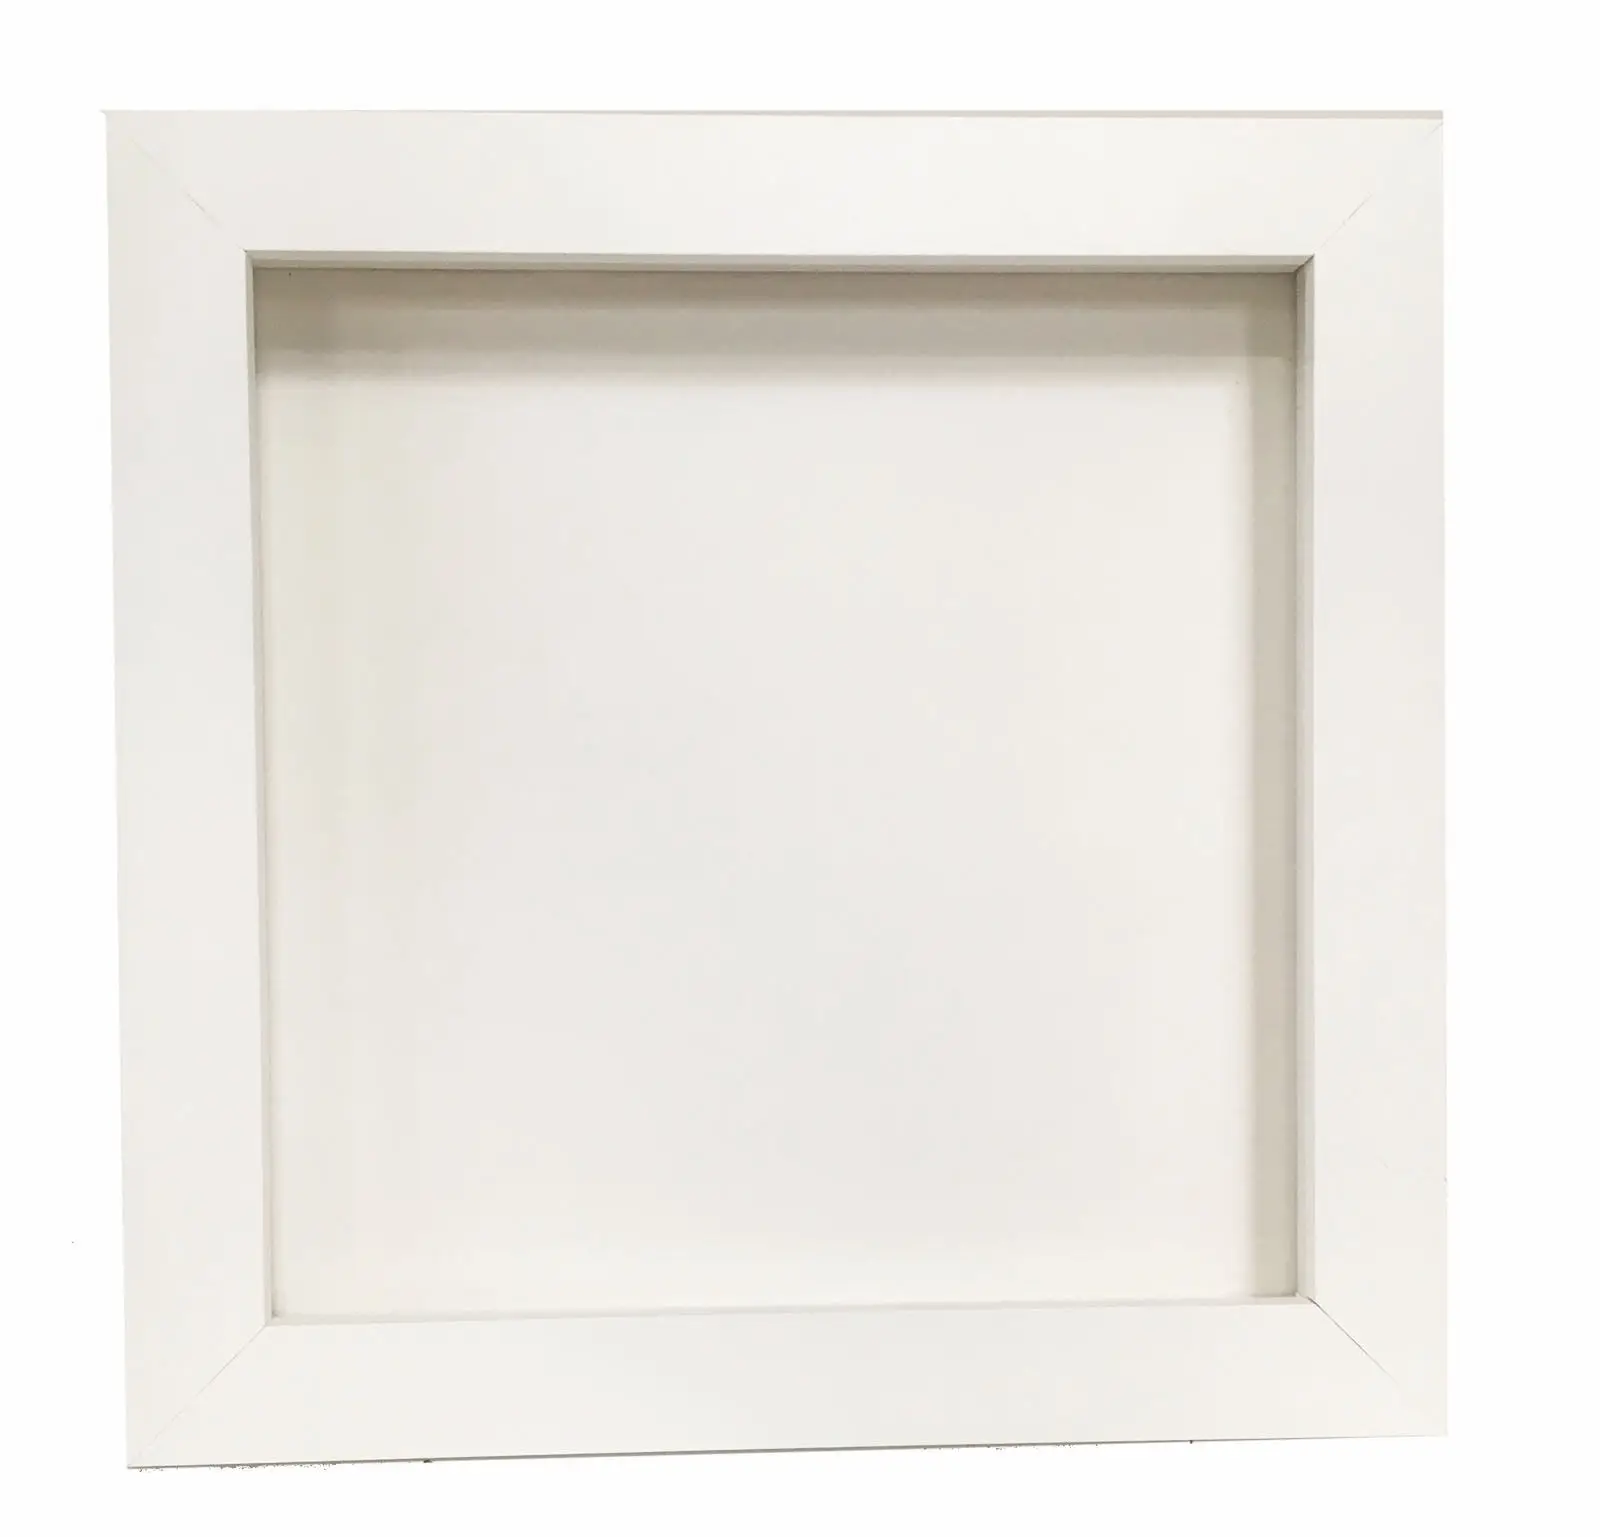 New Square Deep Shadow Box Photo Picture Frame White 23x23cm Scrabble 3D Display 